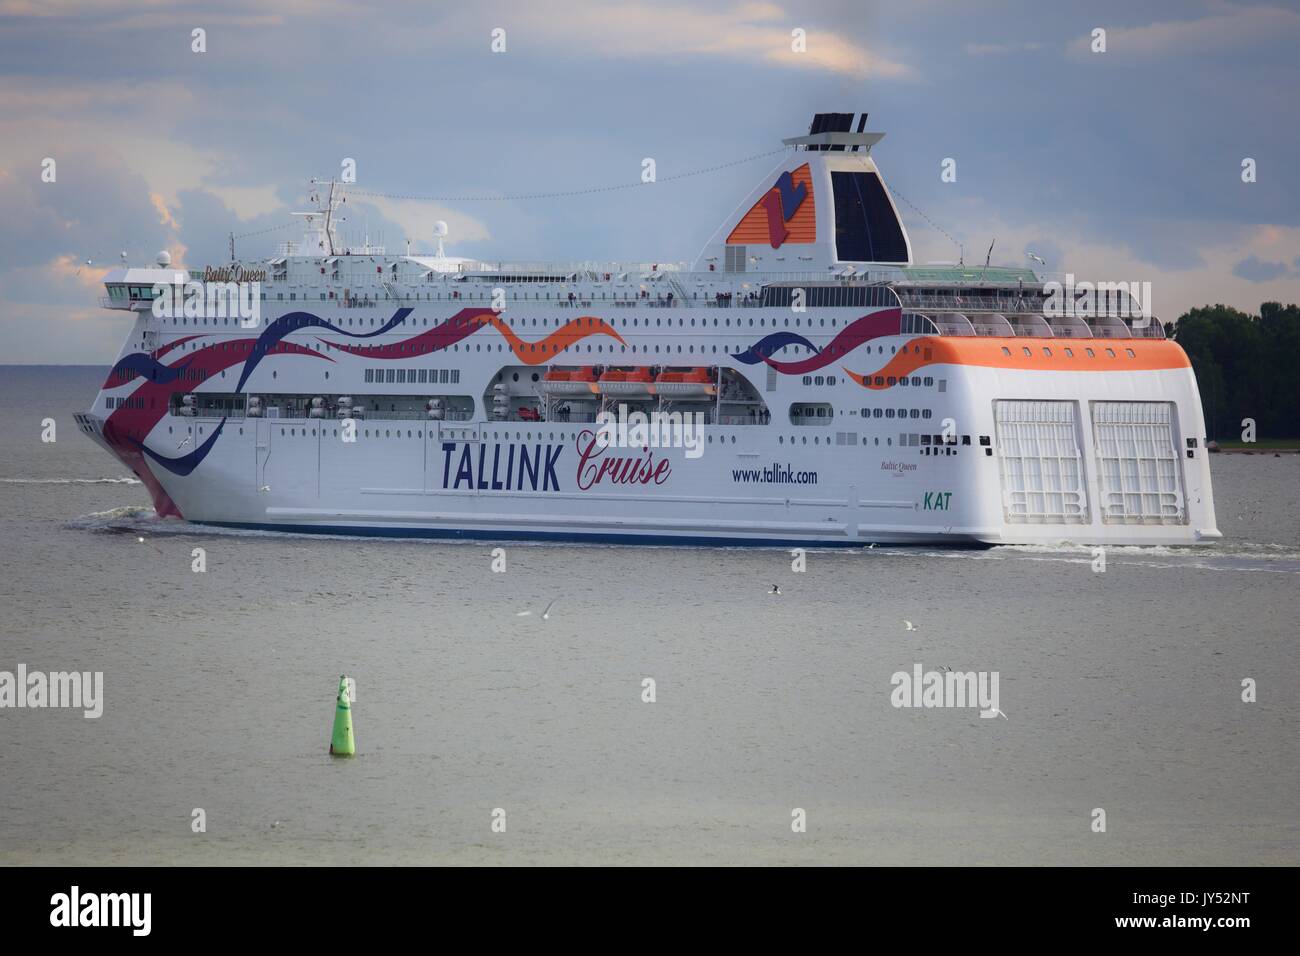 Tallink Cruise, Baltic Queen, on route from Helsinki Stock Photo